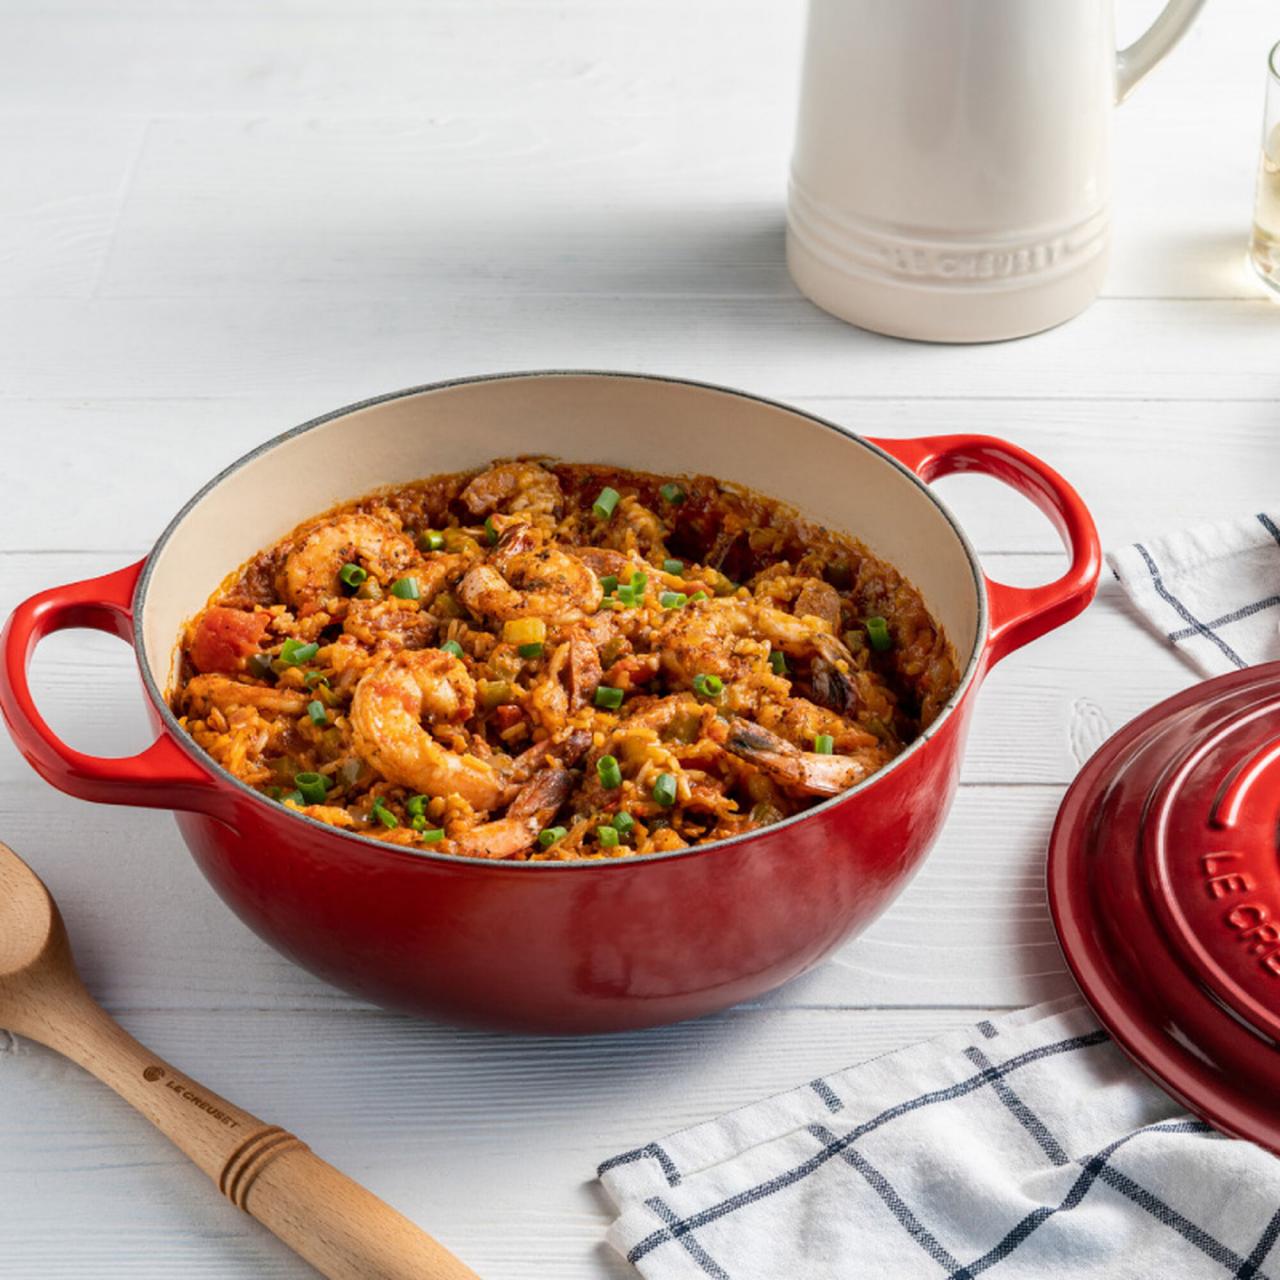 Shop Le Creuset's Factory-to-Table Sale Online, FN Dish -  Behind-the-Scenes, Food Trends, and Best Recipes : Food Network